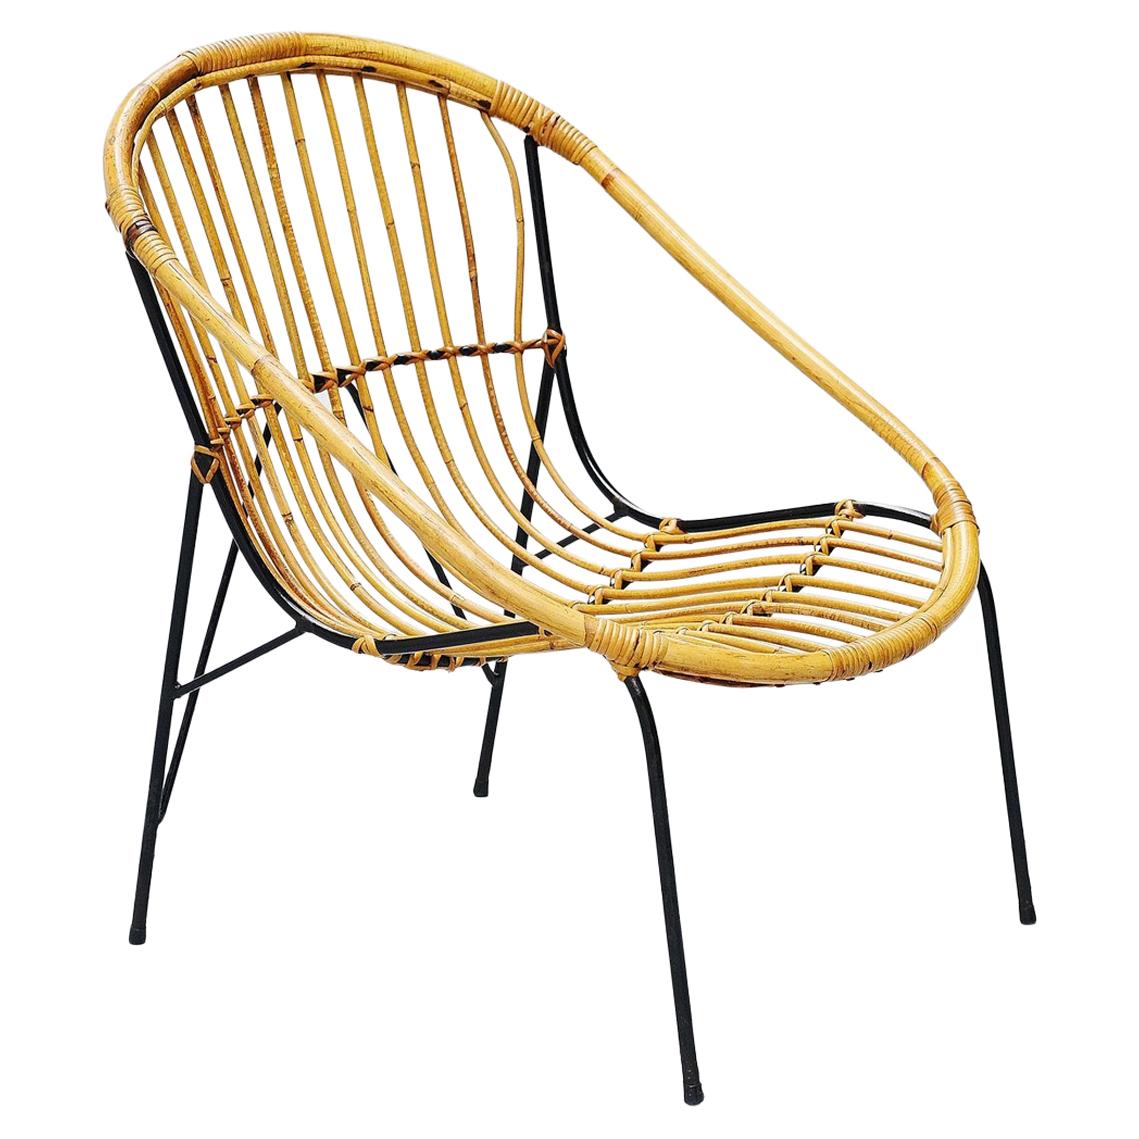 French Sculptural Rattan Lounge Chair, France, 1950